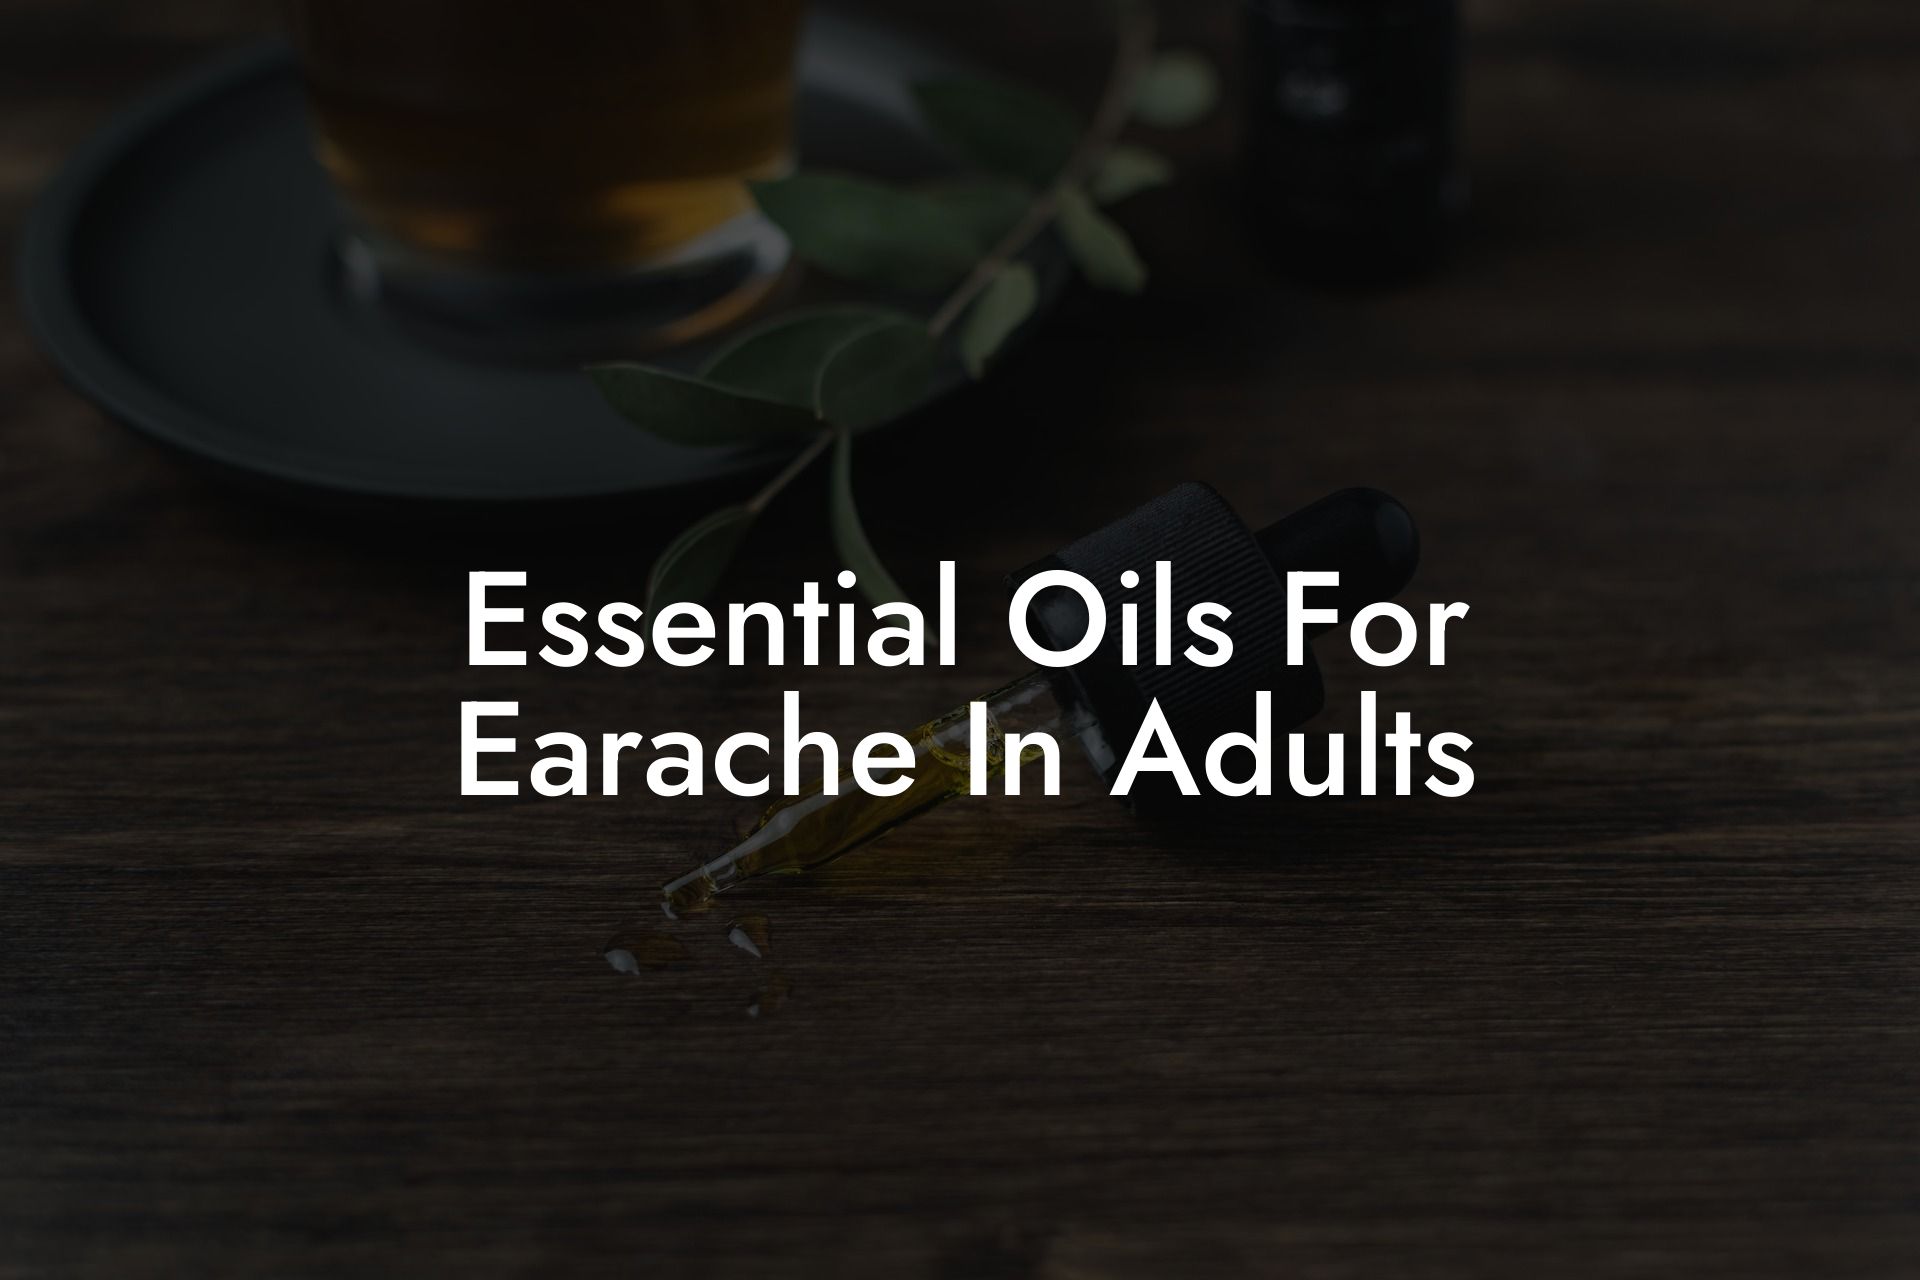 Essential Oils For Earache In Adults